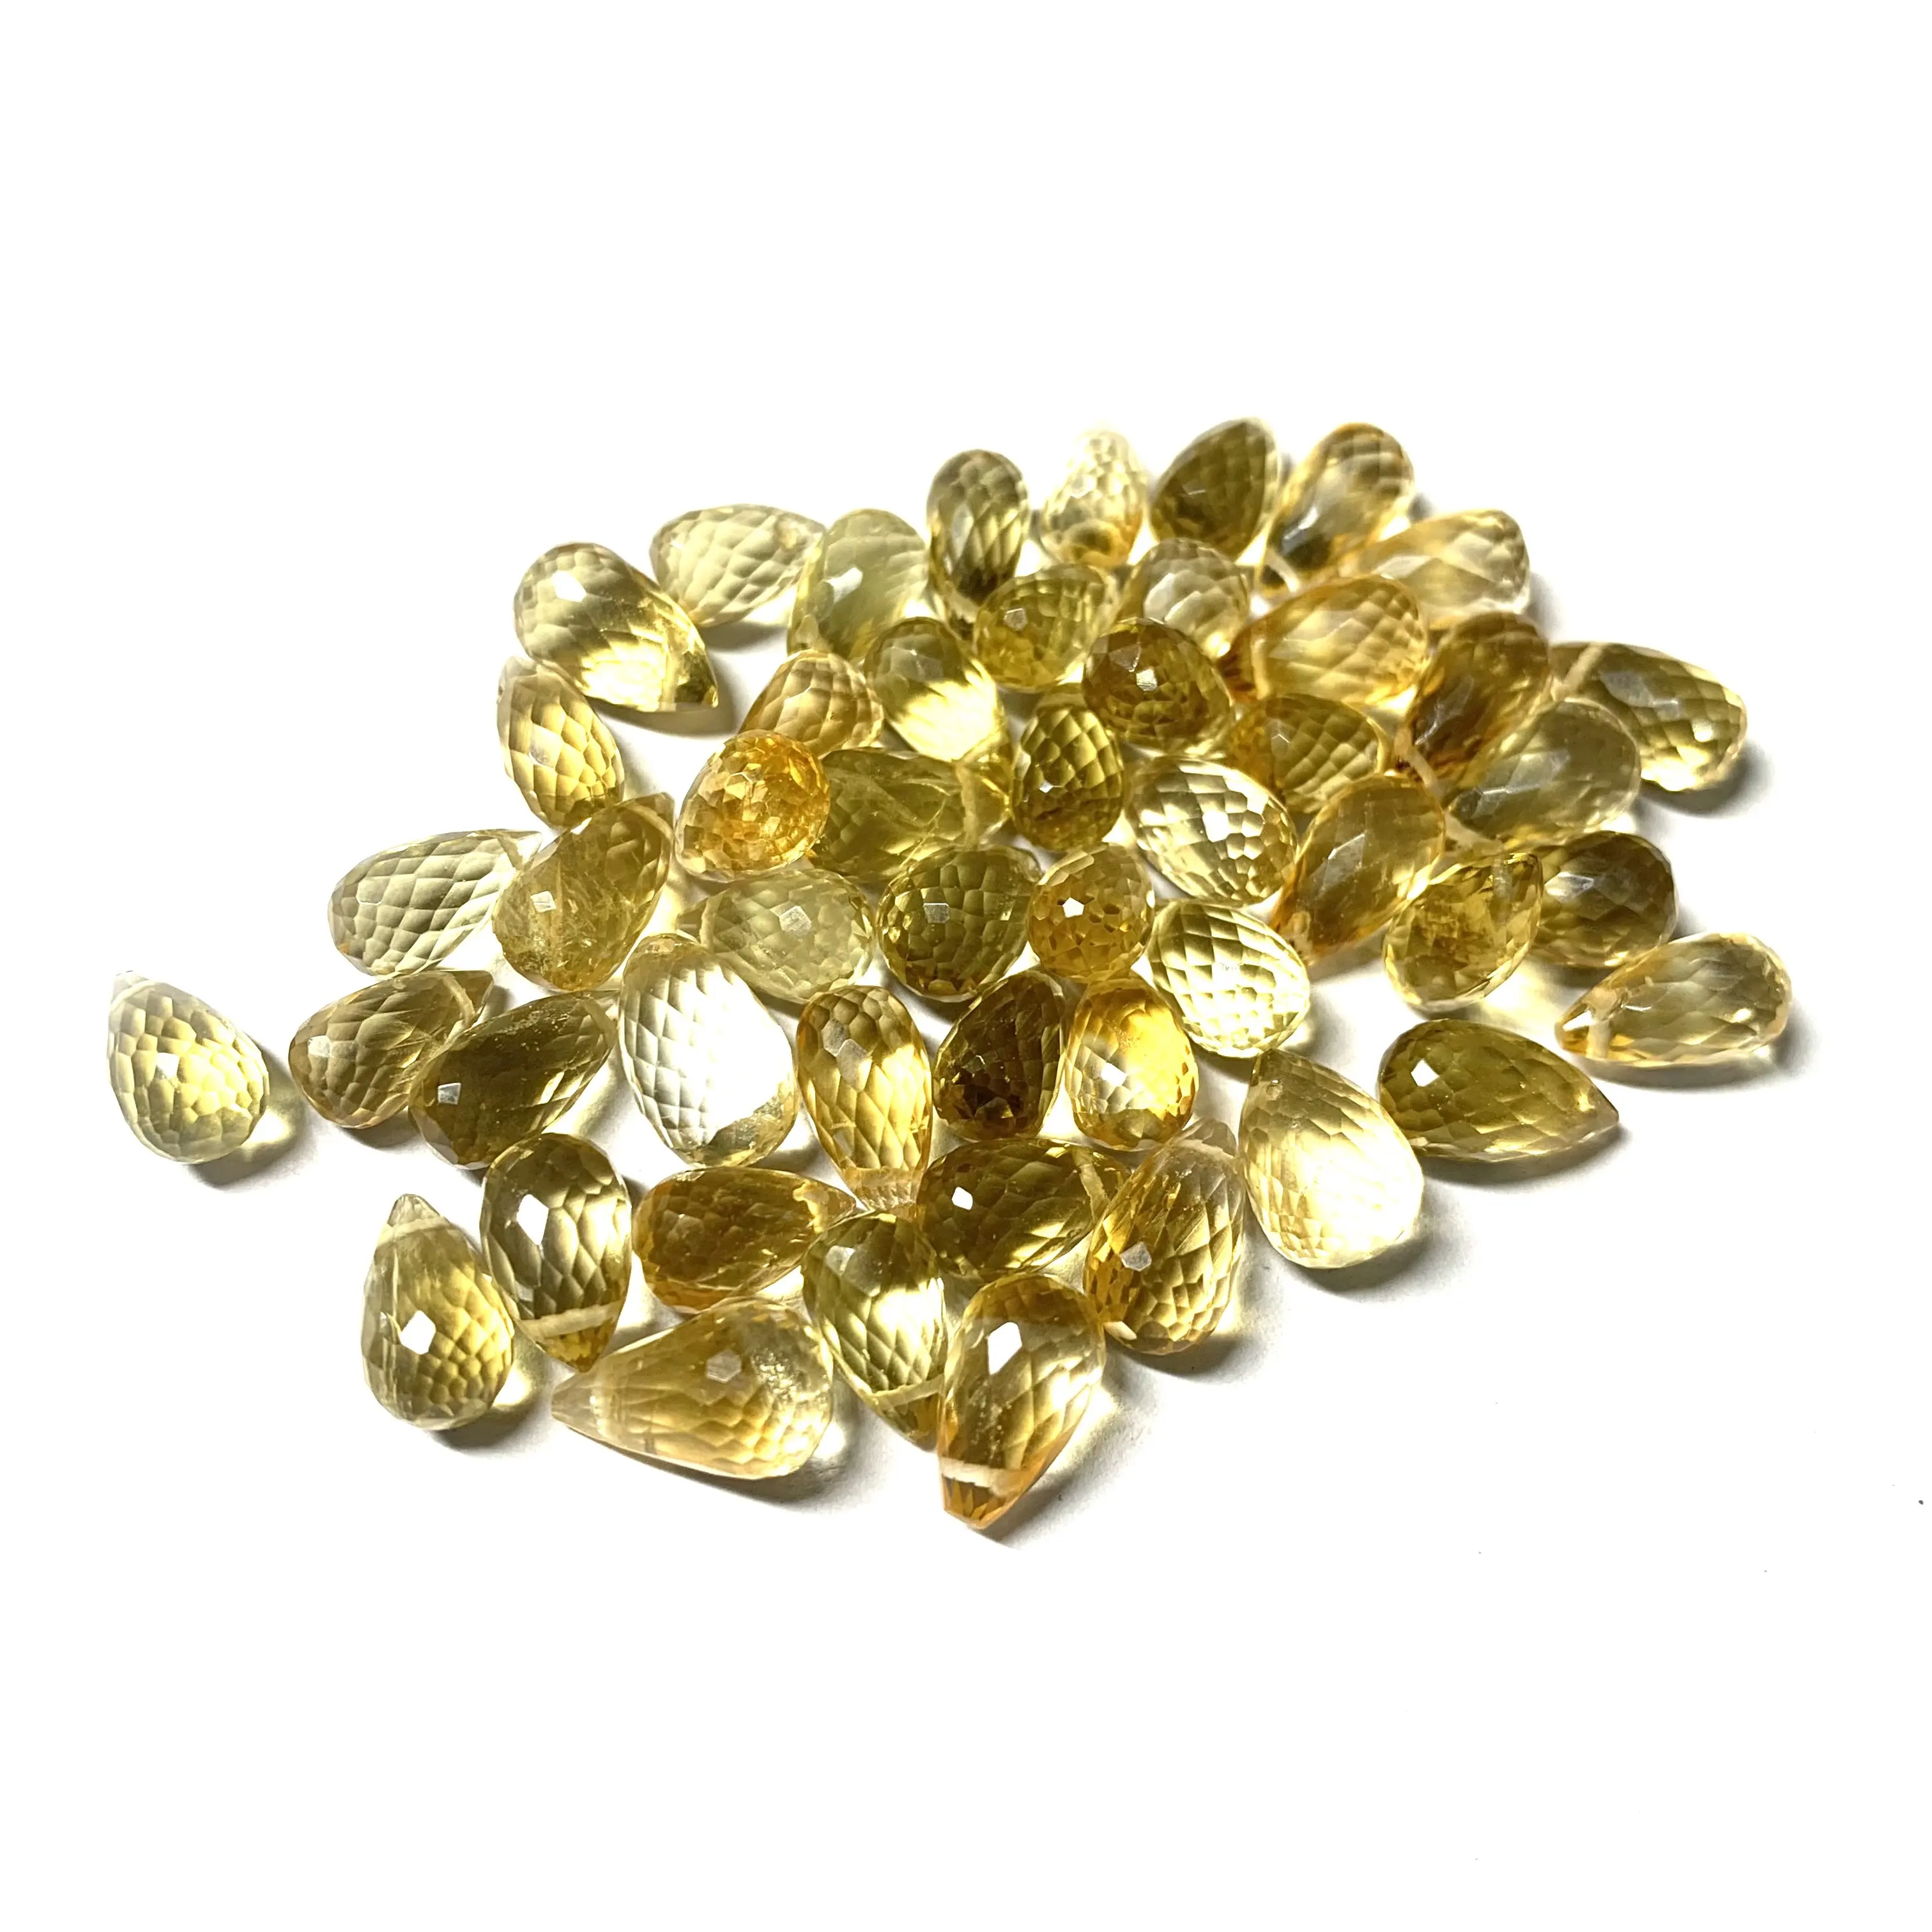 Genuine Brandy Citrine Faceted Pear Beads Natural Citrine Beads Wholesale Citrine Gemstone Beads For Jewelry Making Craft